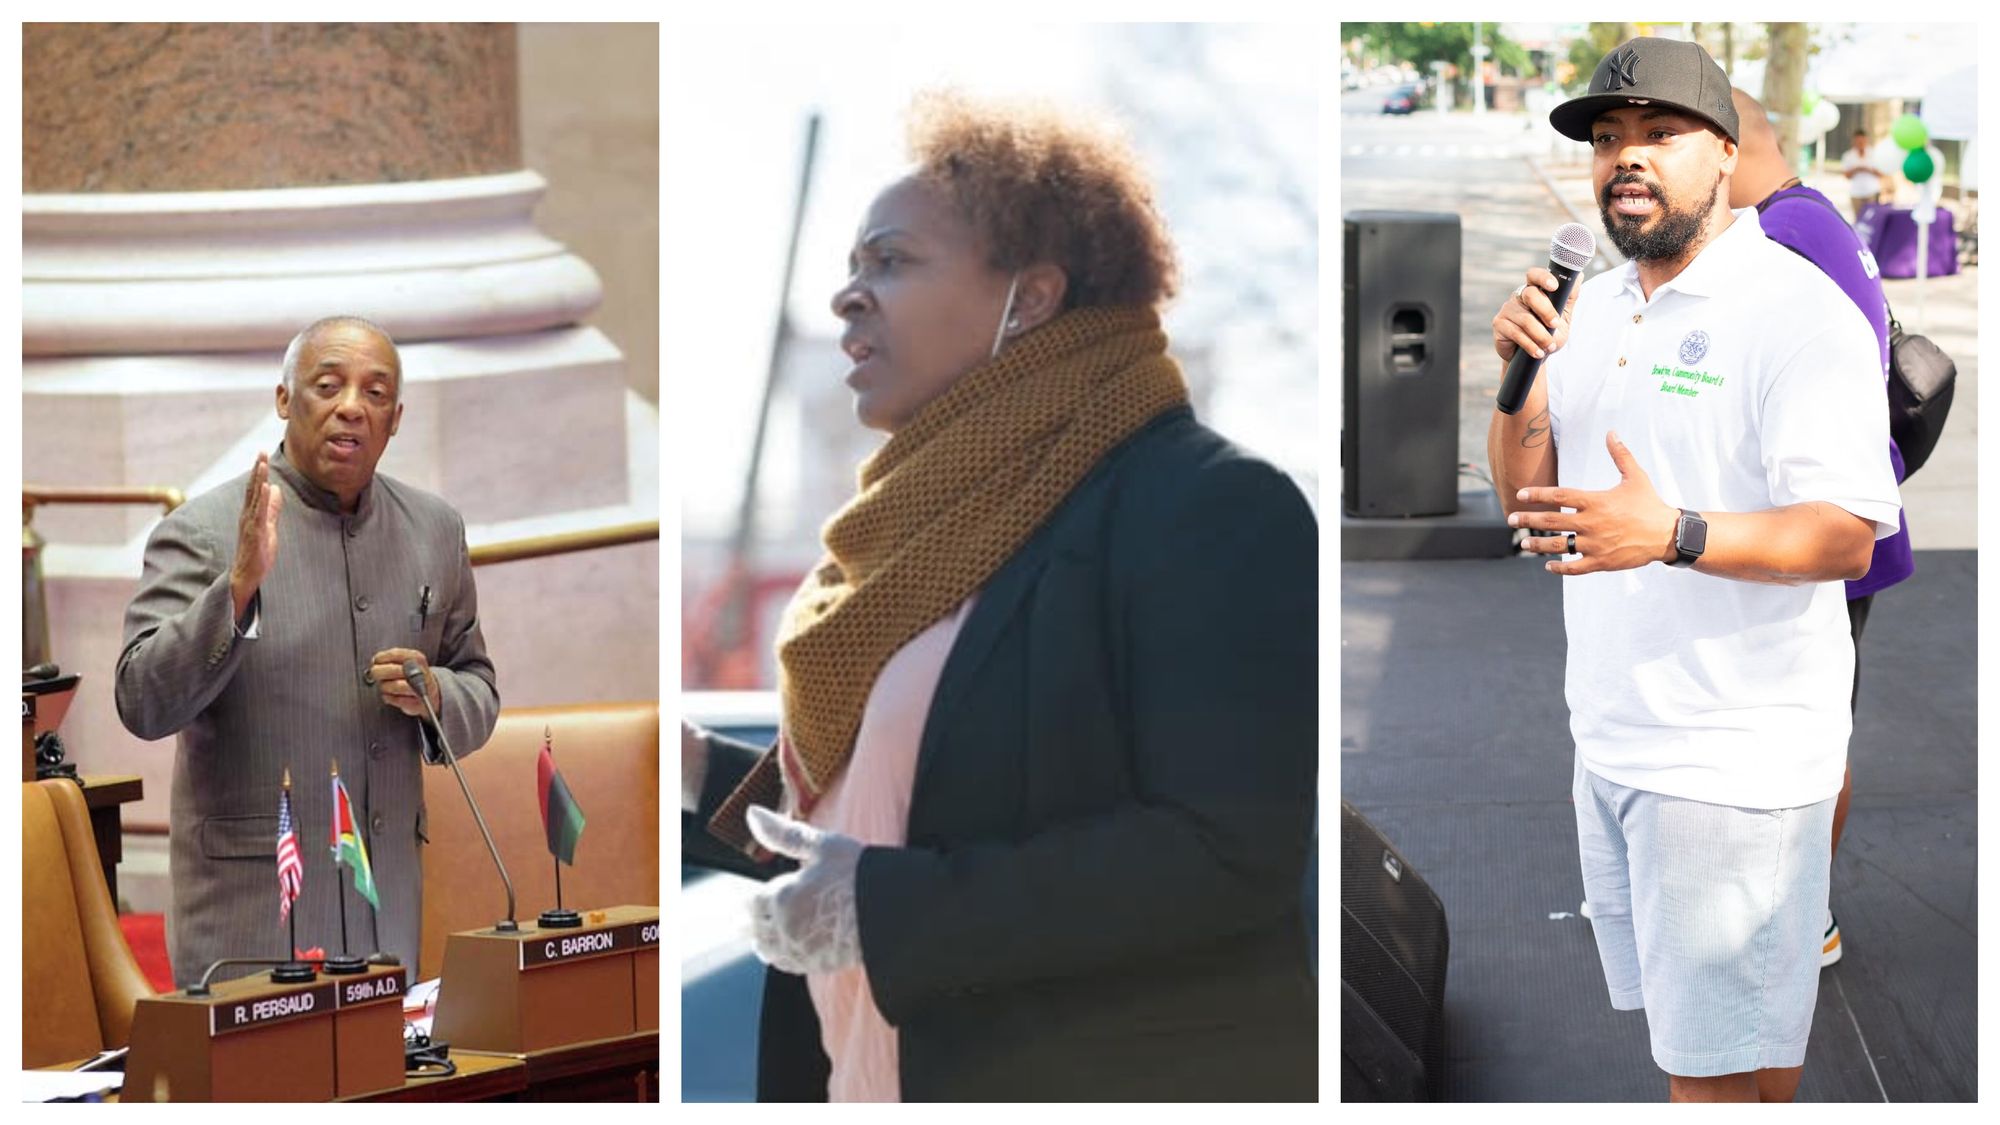 How Candidates for East New York’s 42nd Council District Would Re-Think Policing and Safety